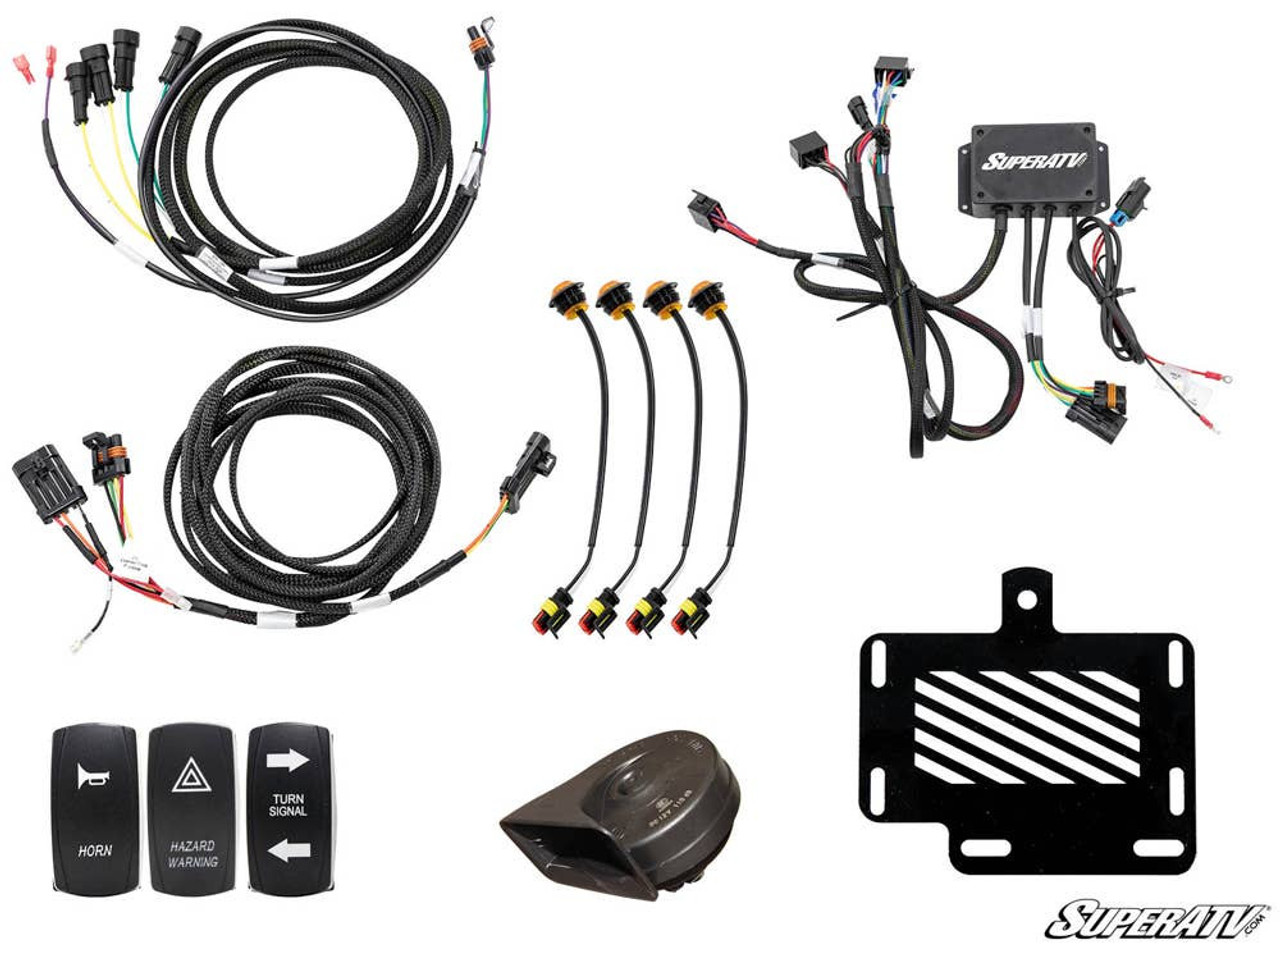 Plug and Play For Easy Installation! SuperATV Turn Signal Kit for Polaris Ranger XP 900 Crew With Steering Column Switch and Attached Horn 2014+